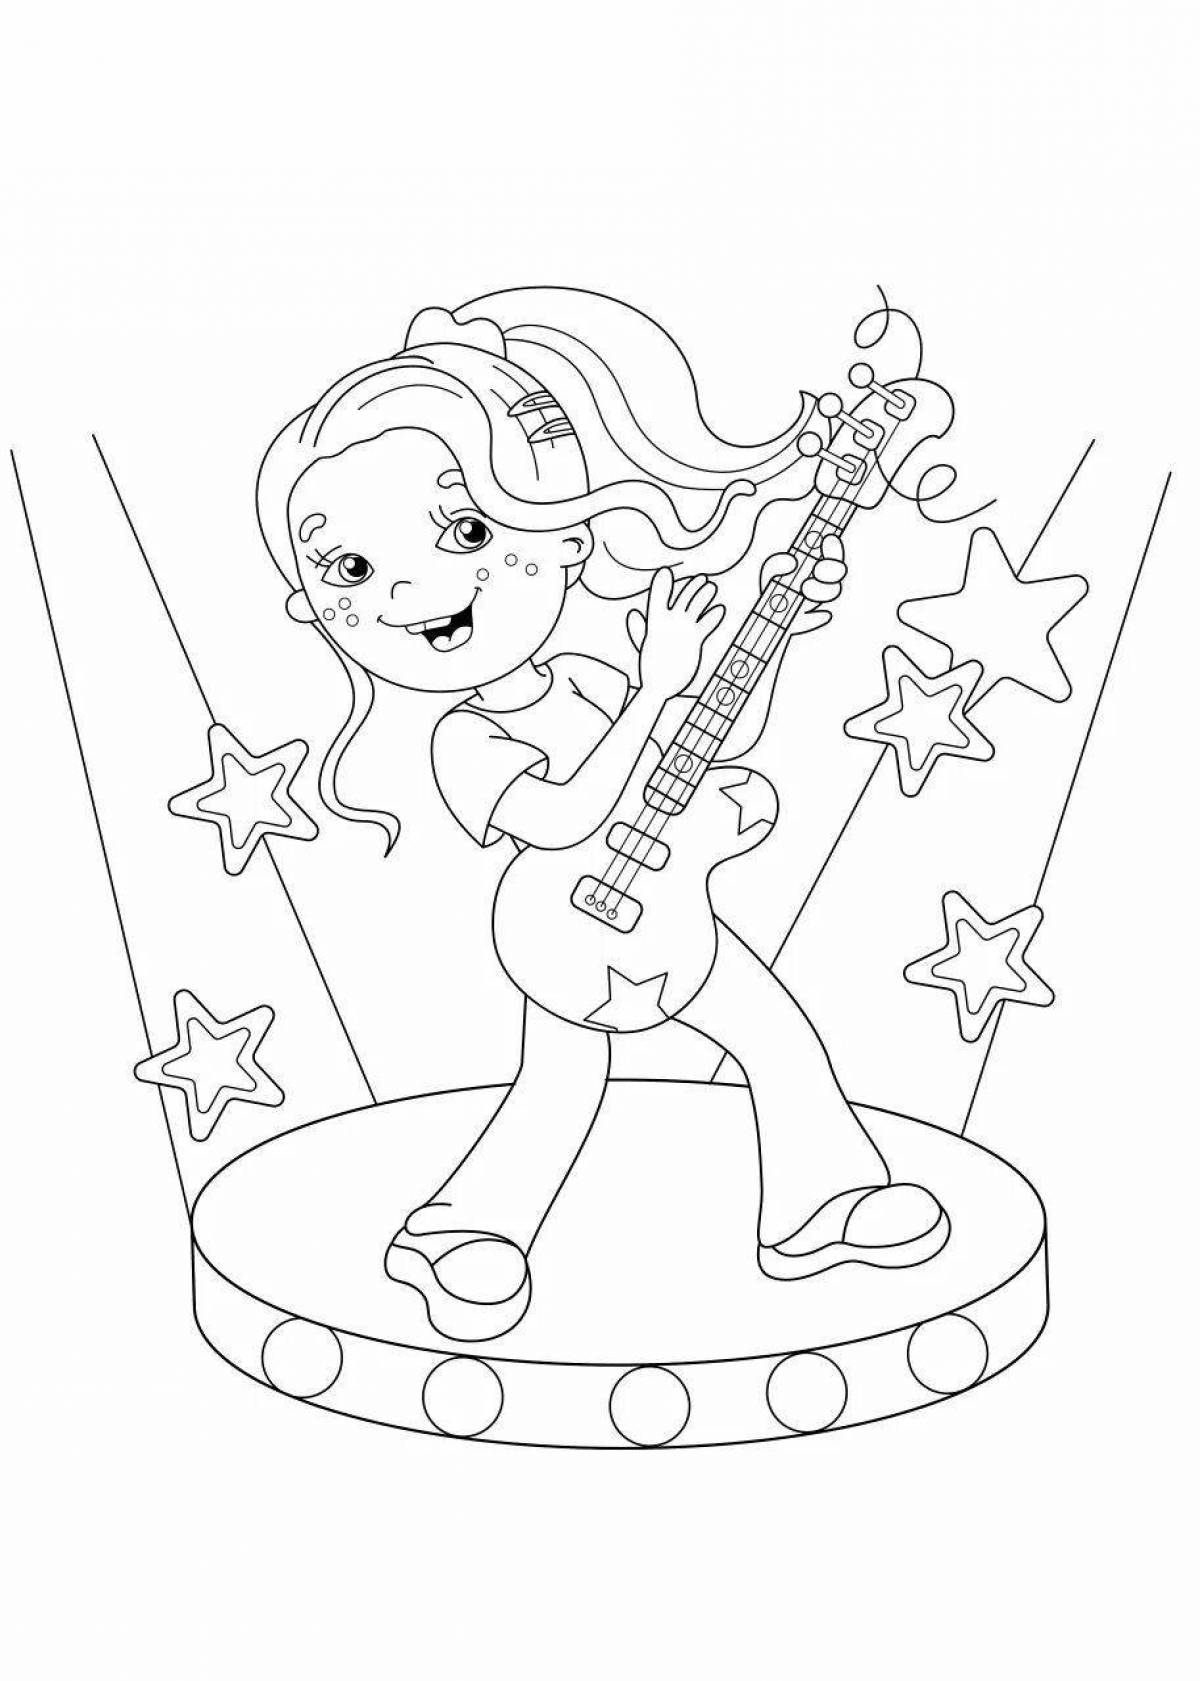 Live singer coloring pages for kids